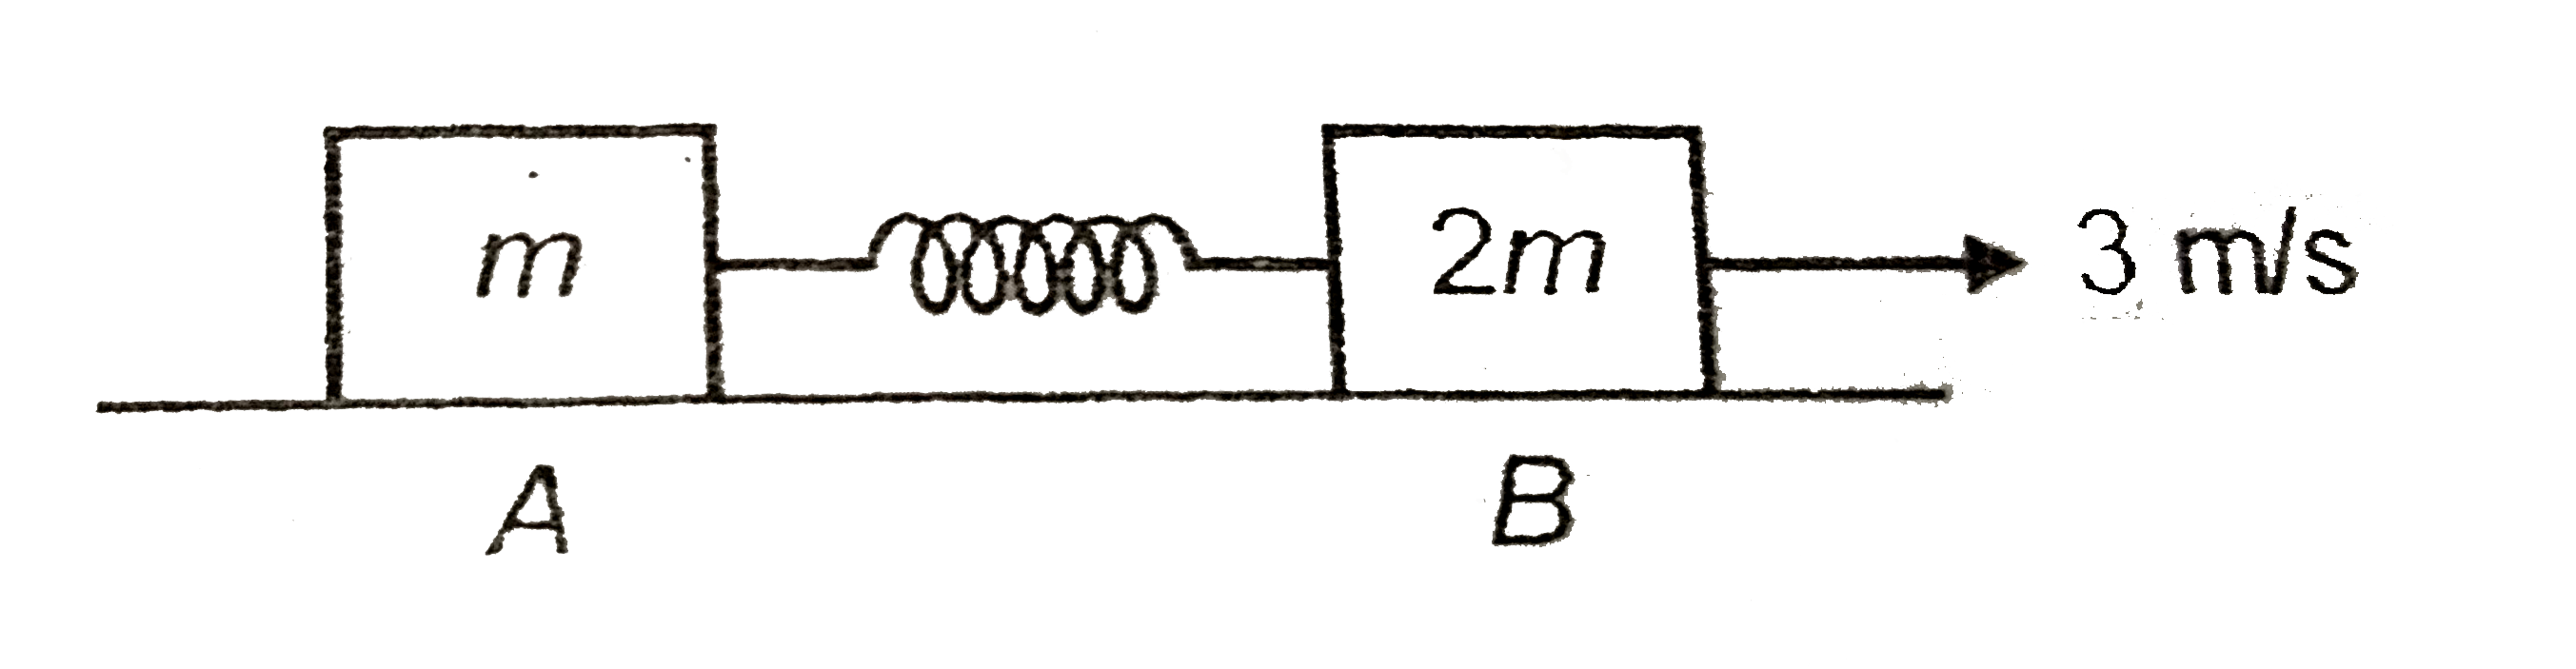 Two blocks A and B of masses m and 2m are placed on a smooth horizontal surface. Block B is given a speed of 3m//s. Find   (i) The maximum speed of A   (ii) The minimum speed of B.